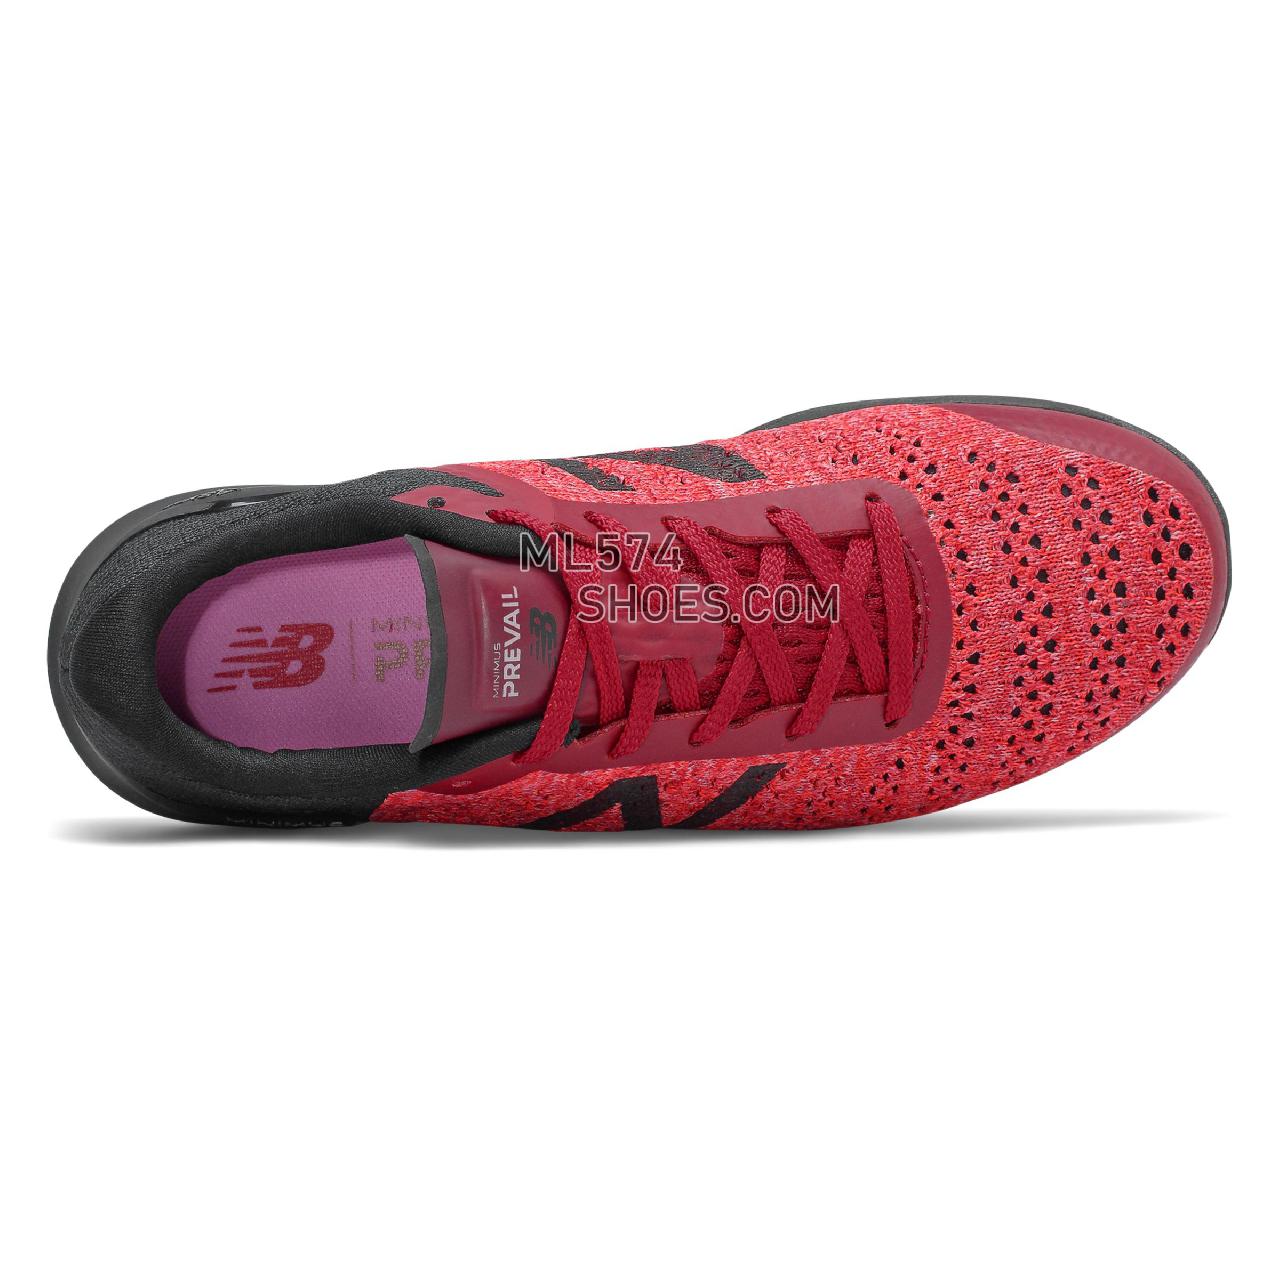 New Balance Minimus Prevail - Women's Workout - Neo Crimson with Candy Pink and Black - WXMPCP1